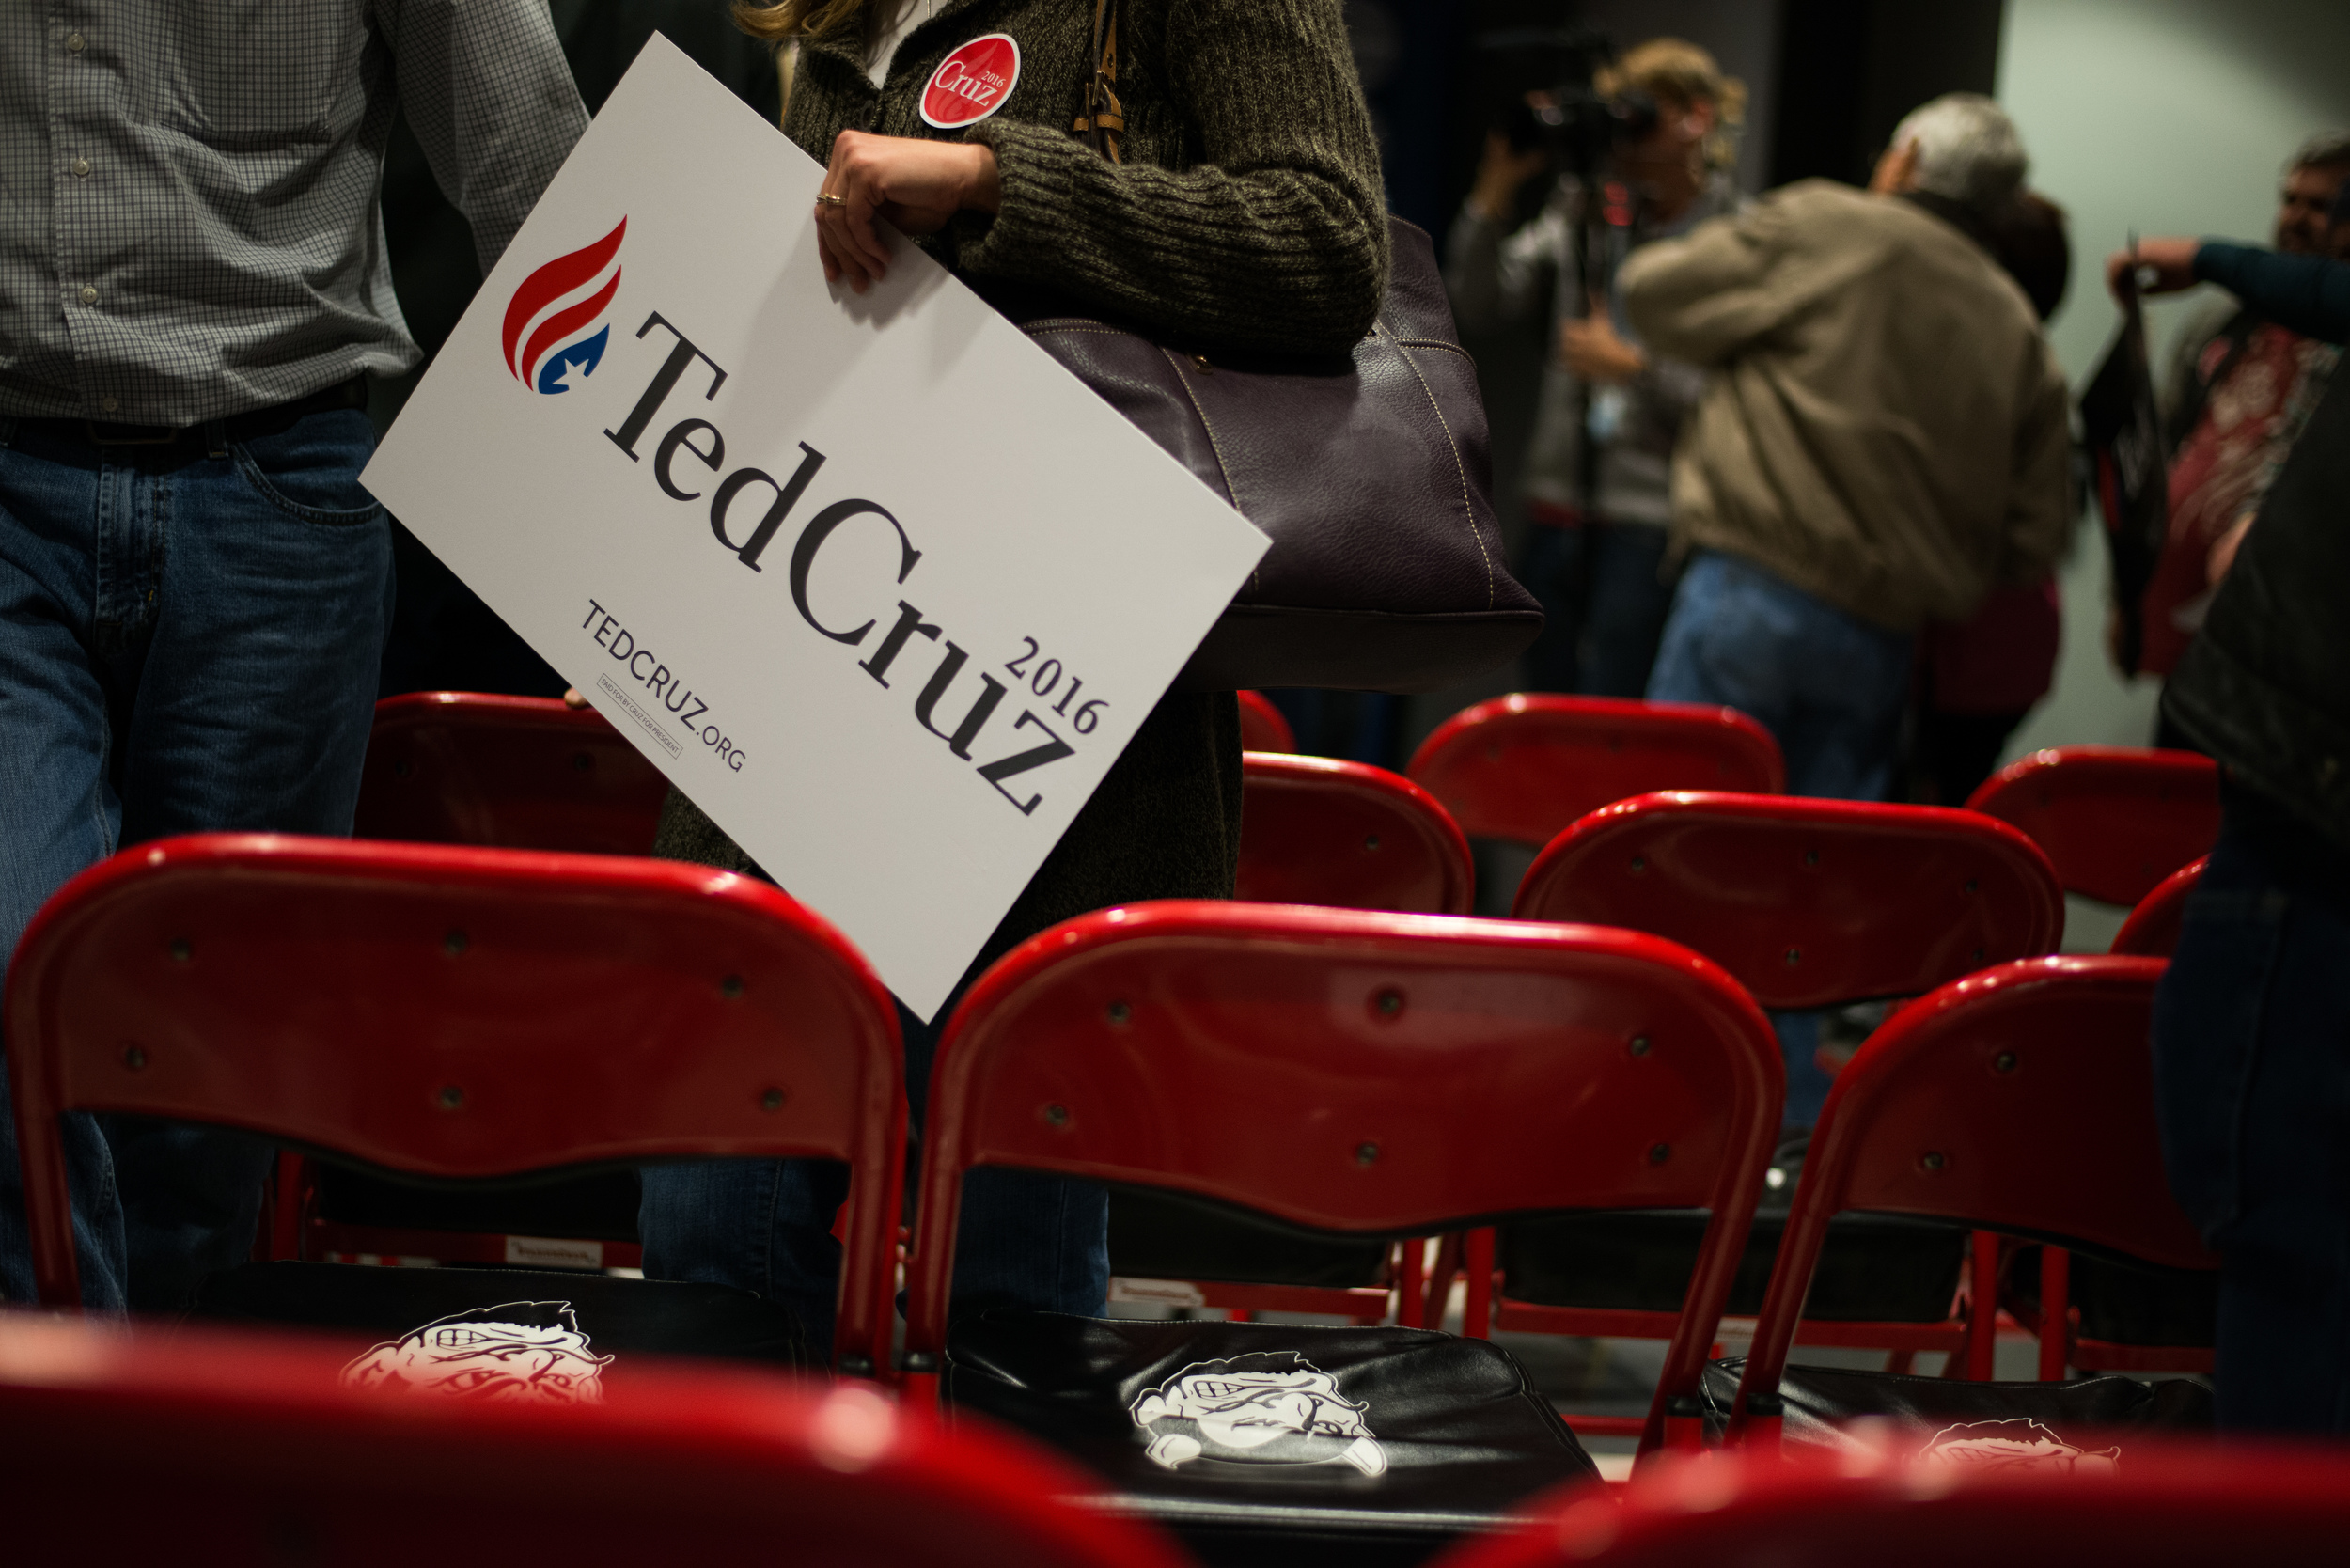  A woman carries a Ted Cruz campaign sign after Cruz addressed voters at Lamoni High School in Lamoni, Iowa, on Nov. 28, 2015. 